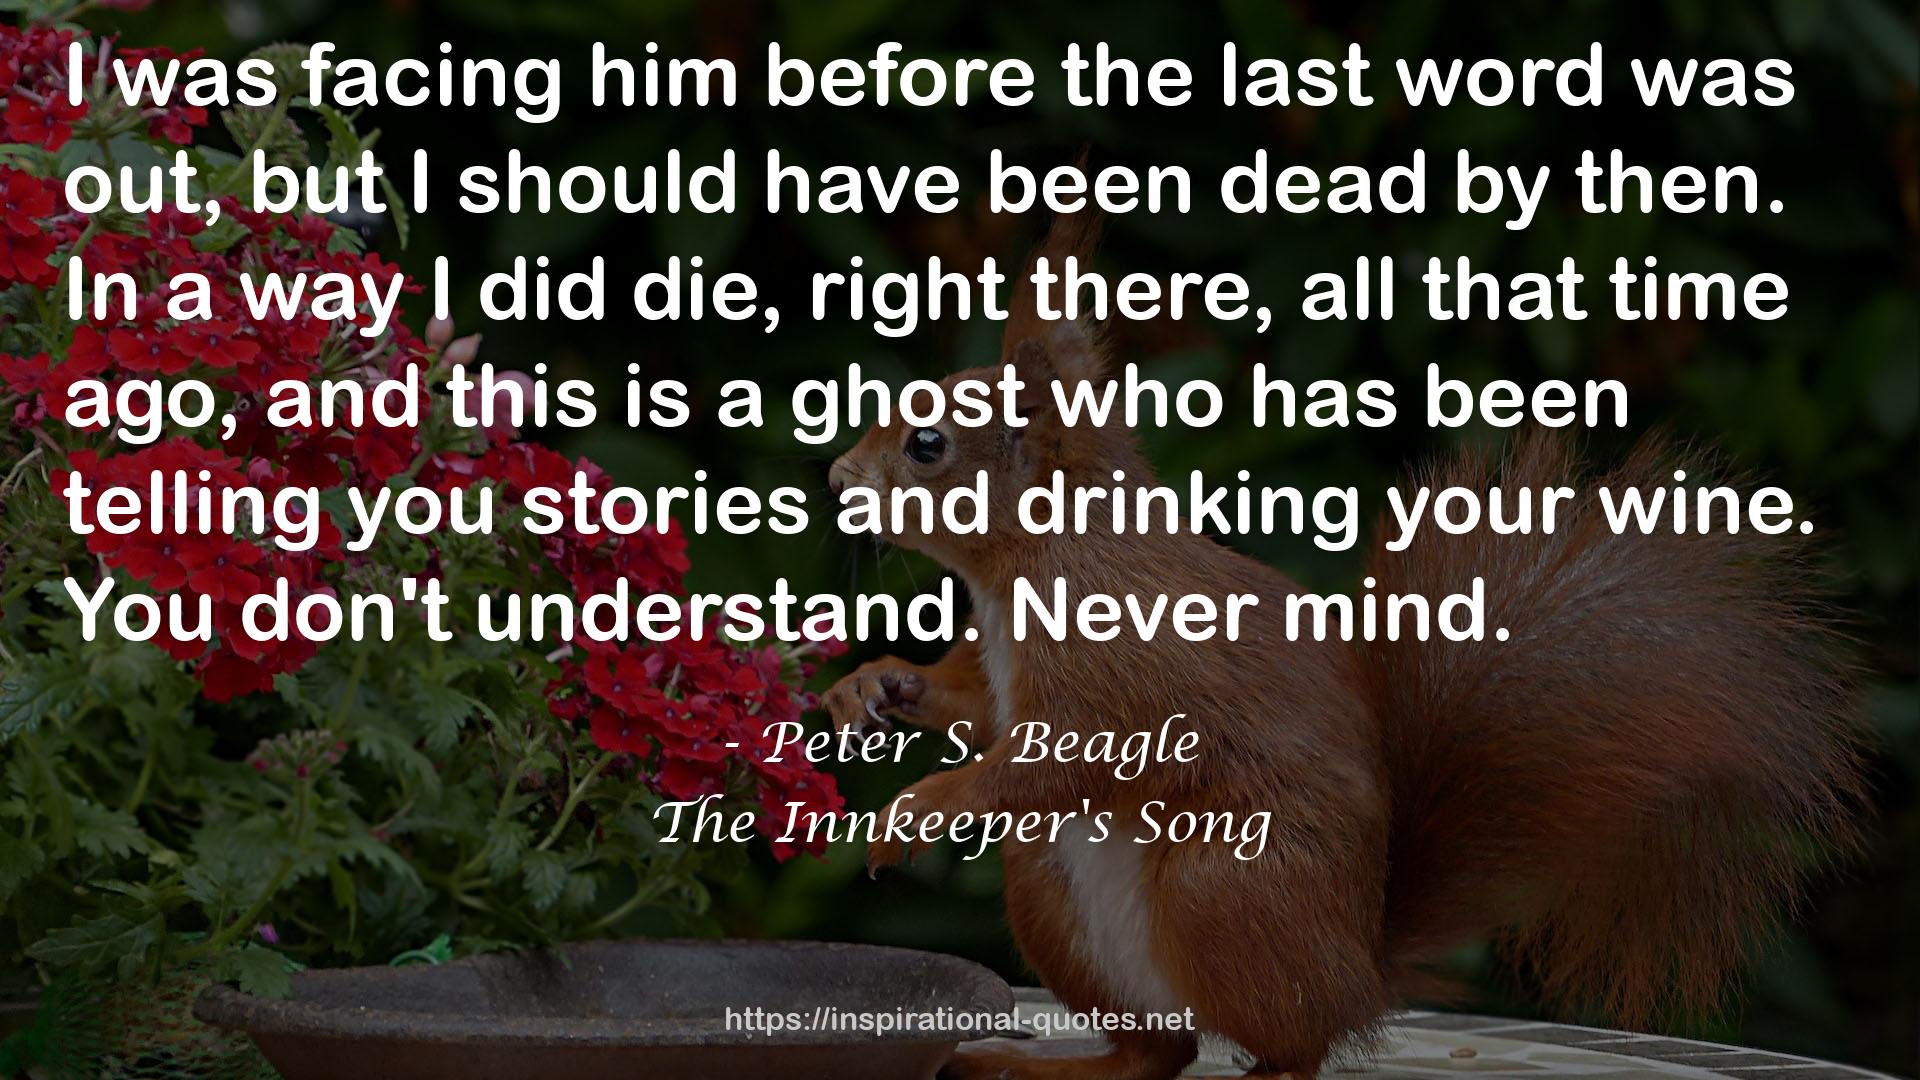 The Innkeeper's Song QUOTES